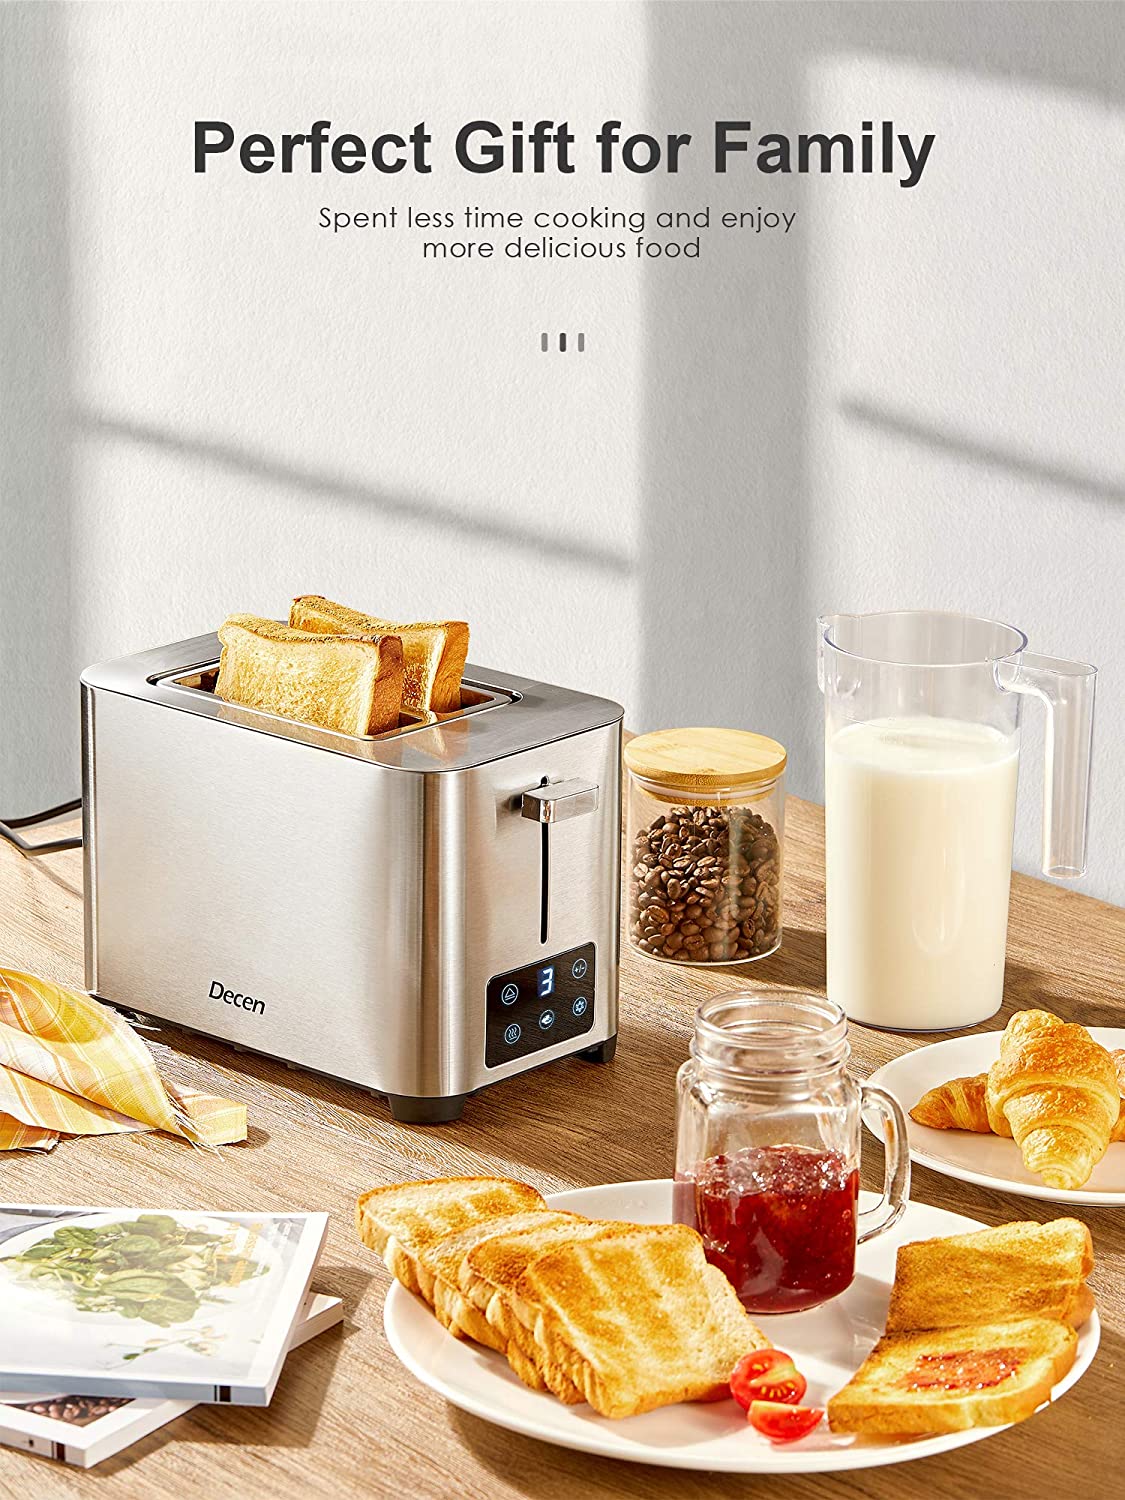 Toaster 2 Slice, DECEN Stainless Steel Toaster with Touch LCD Display (6 Toasting Settings), 2 Extra-Wide Slots, Bagel, Cancel, Defrost, and Reheat Function, Slide Out Crumb Tray, Silver